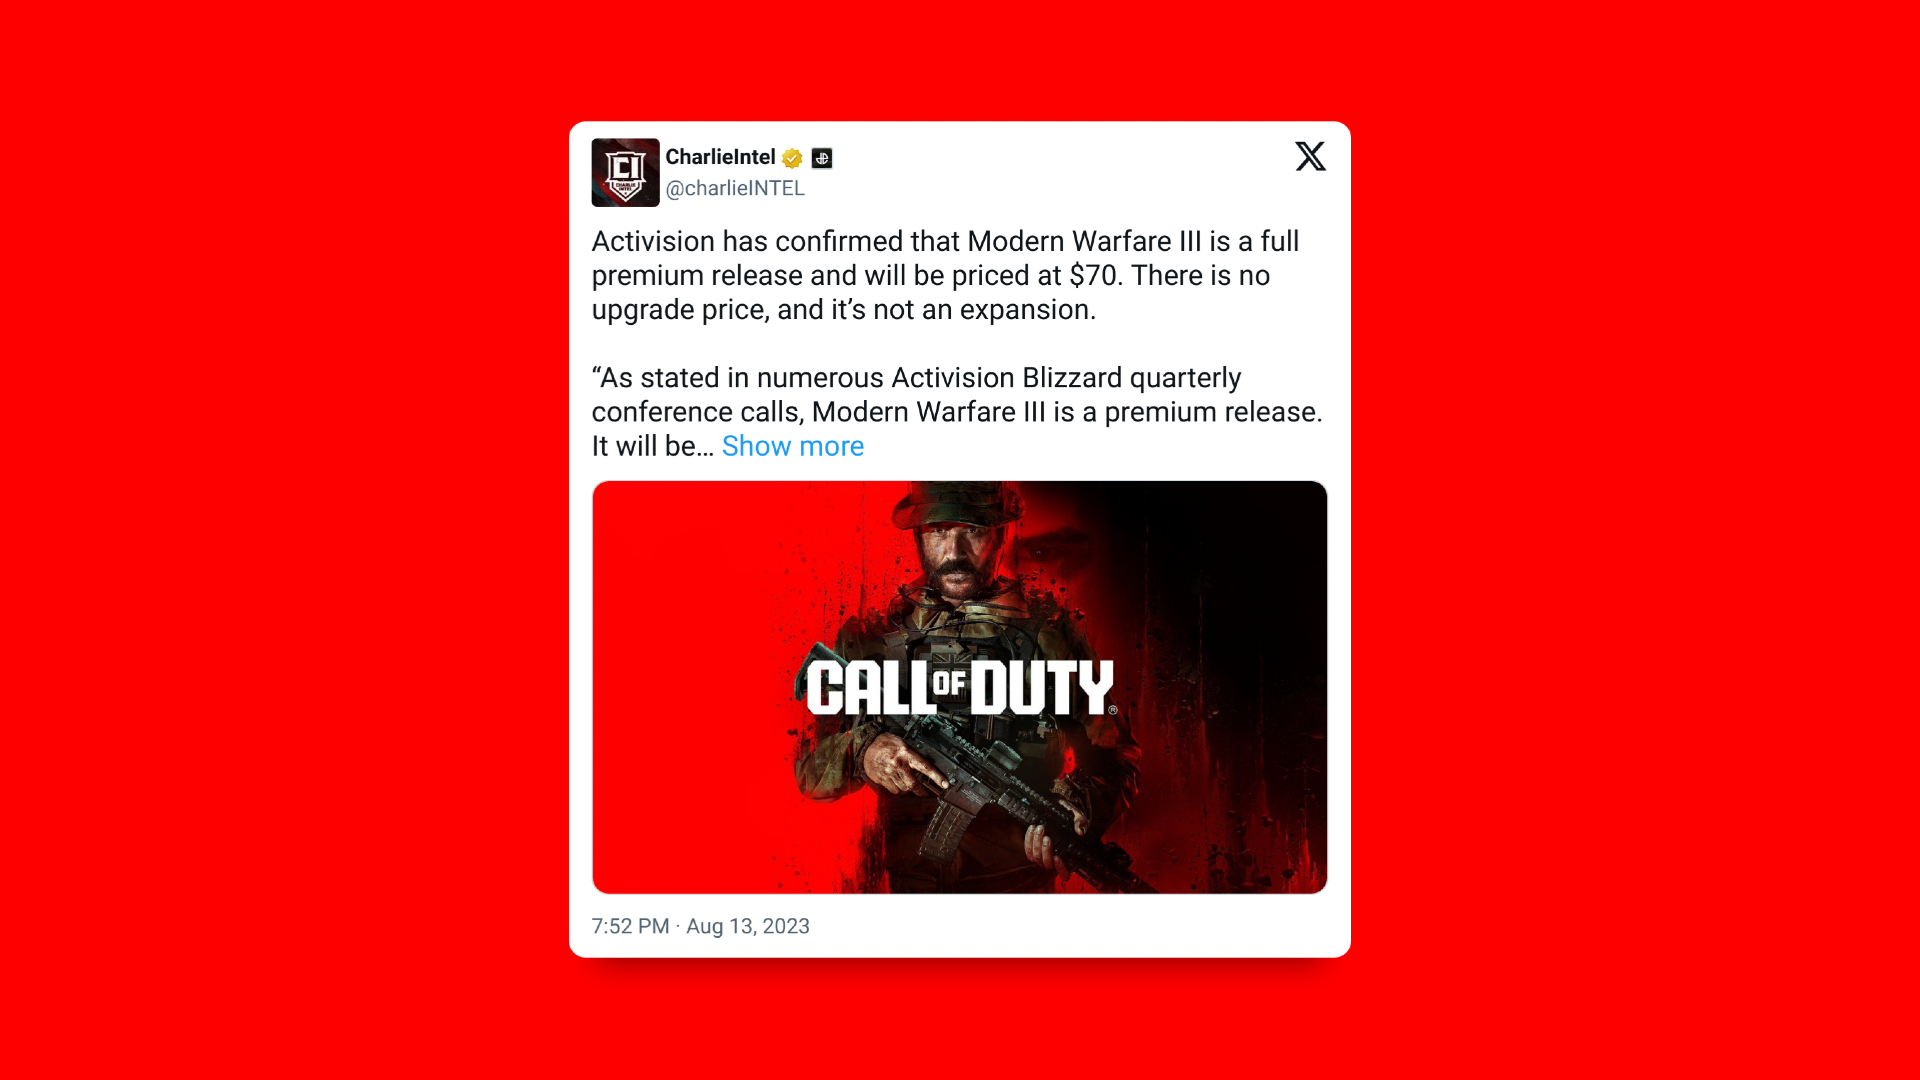 Post detailing Modern Warfare 3's confirmed price by Activision on Charlie Intel's Twitter